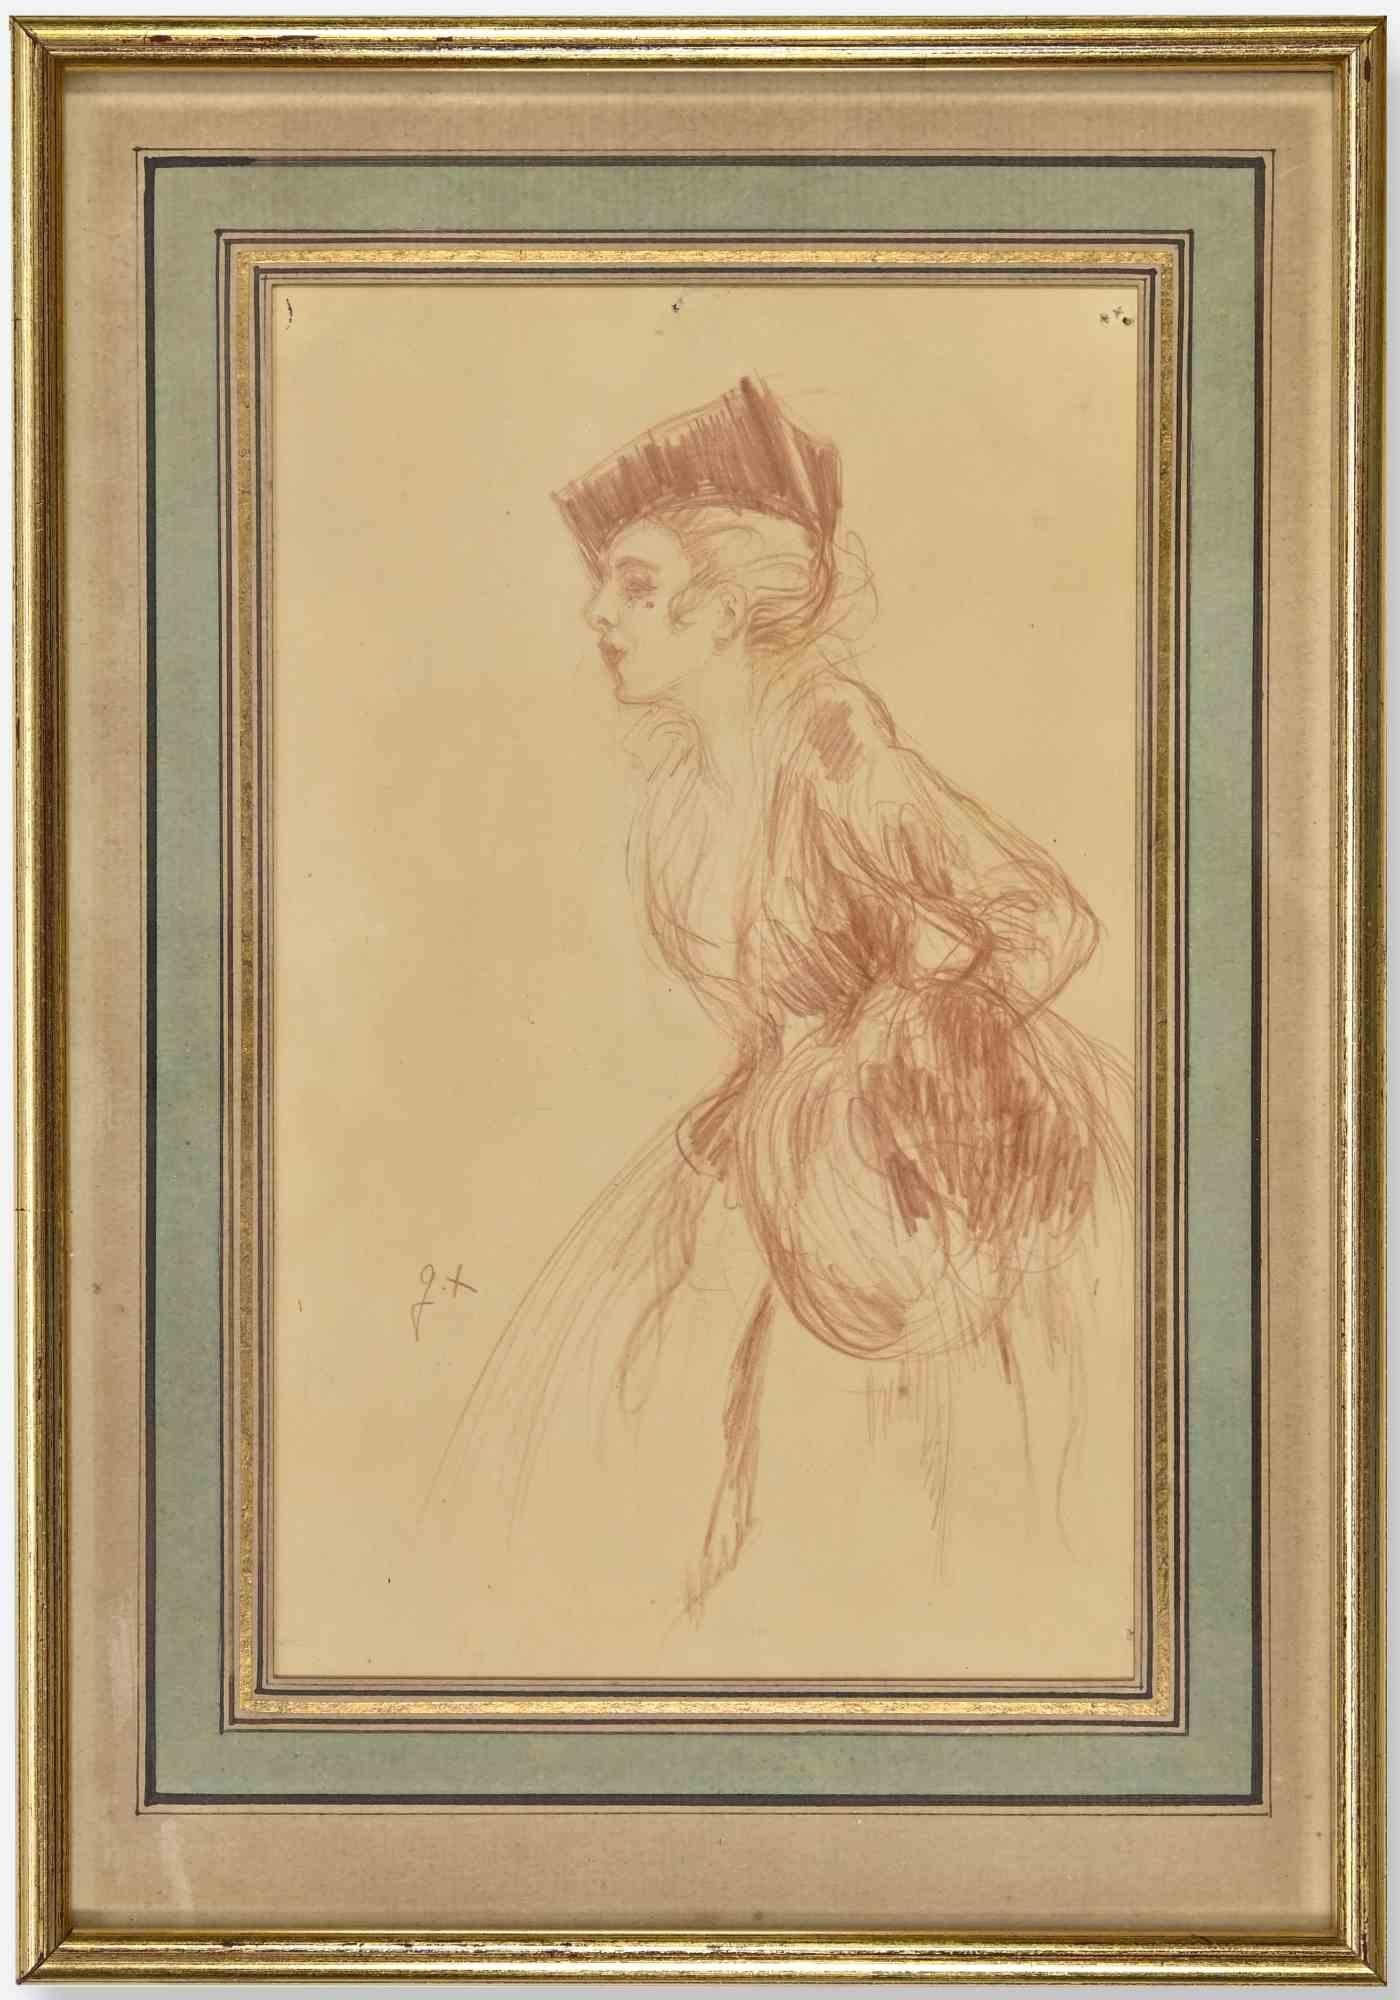 Woman is a modern artwork realized by the French artist,  Jules Marie Auguste Leroux  ( Paris 1871-1954) painter and illustrator.

A pencil drawing on paper.

Monogram of the artist on the left.

Auguste Leroux was a brilliant artist, winner of the